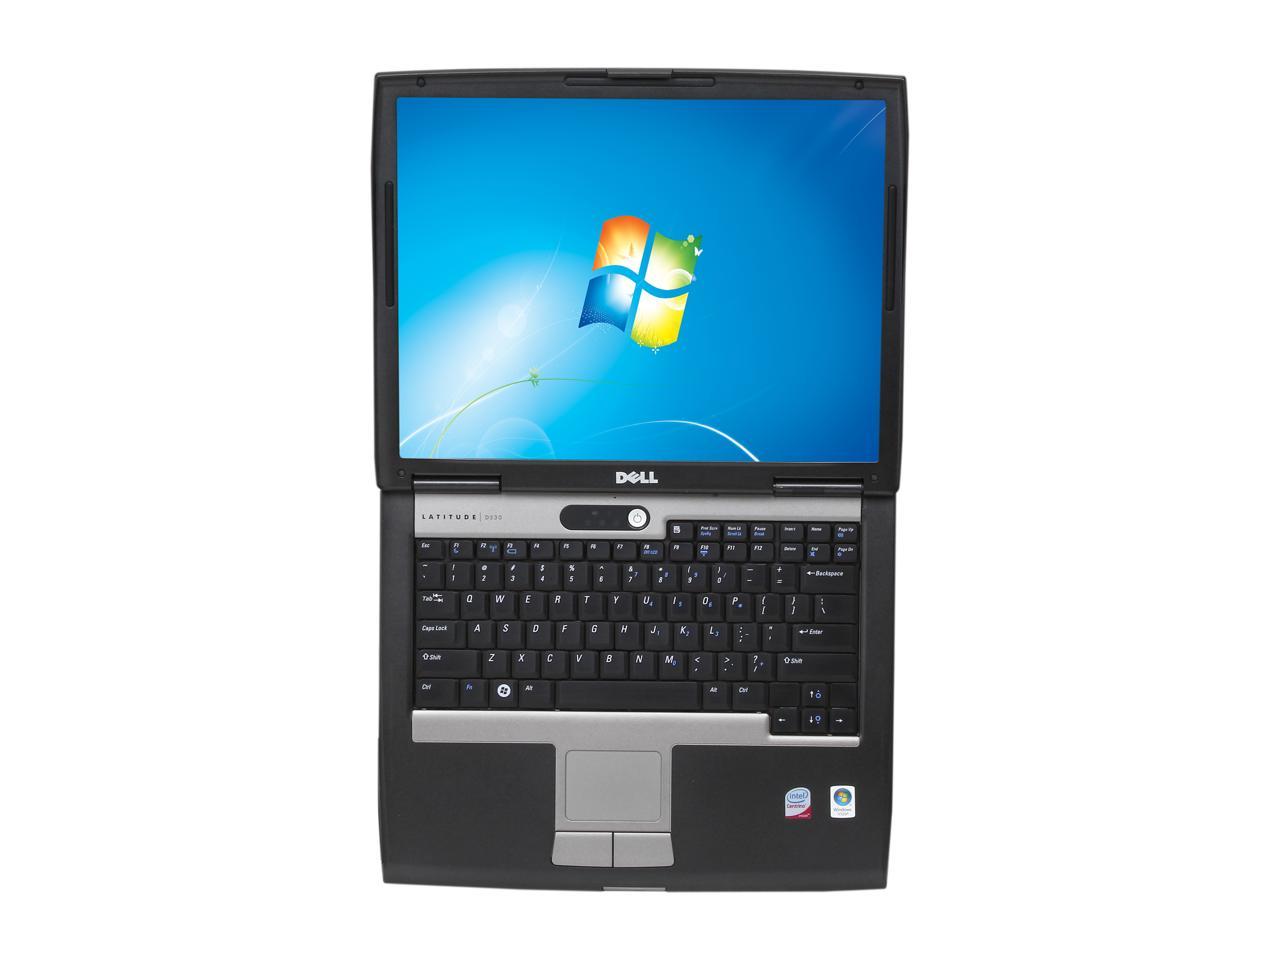 Refurbished: DELL Laptop Latitude D530 Intel Core 2 Duo 2.00 GHz 2 GB